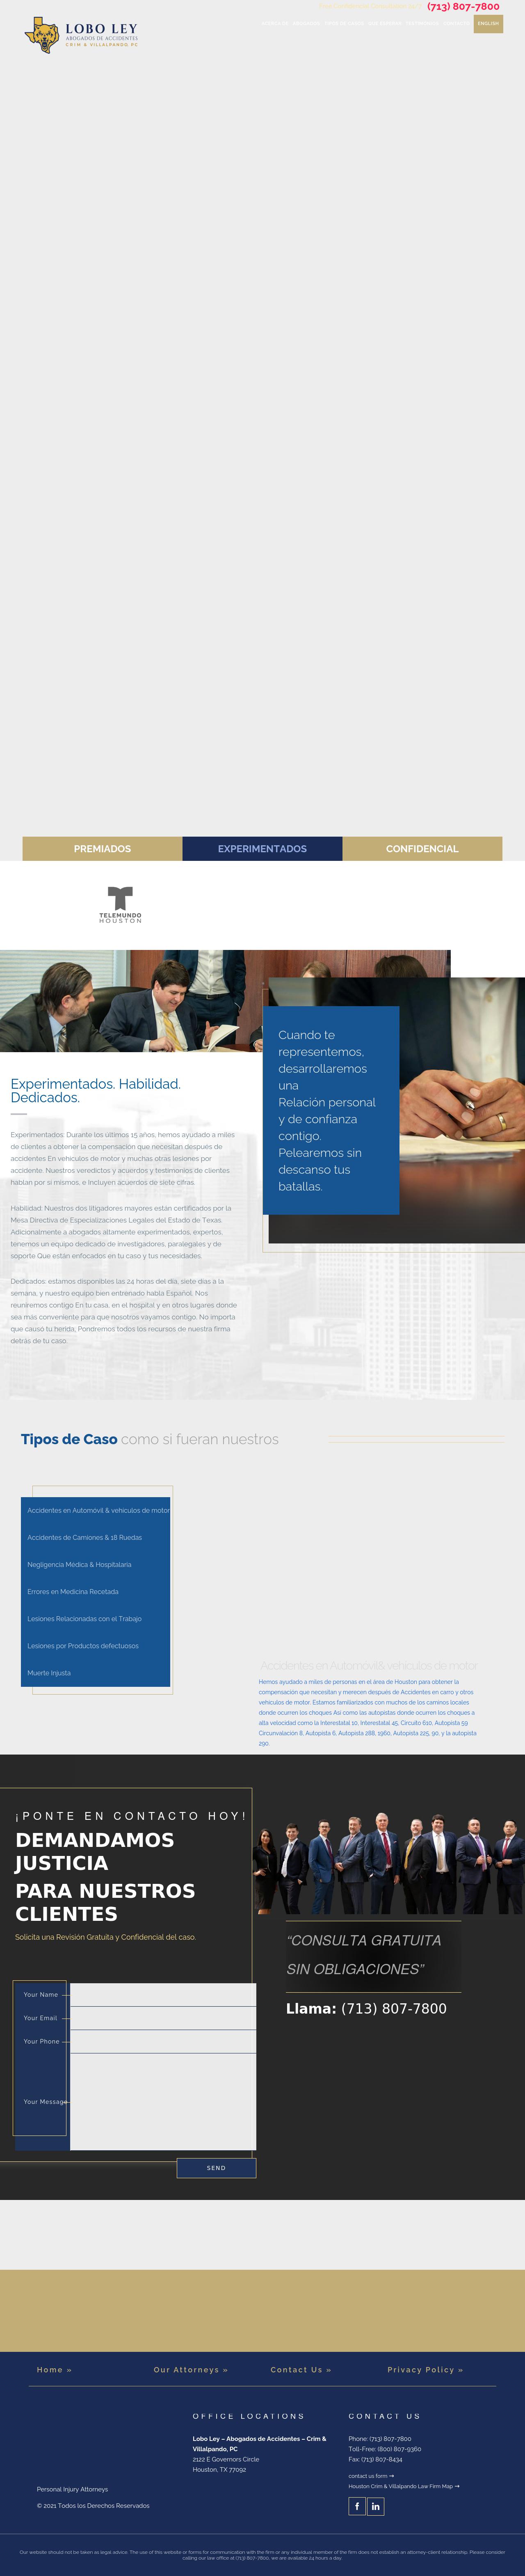 Crim Law Firm PC The - Houston TX Lawyers